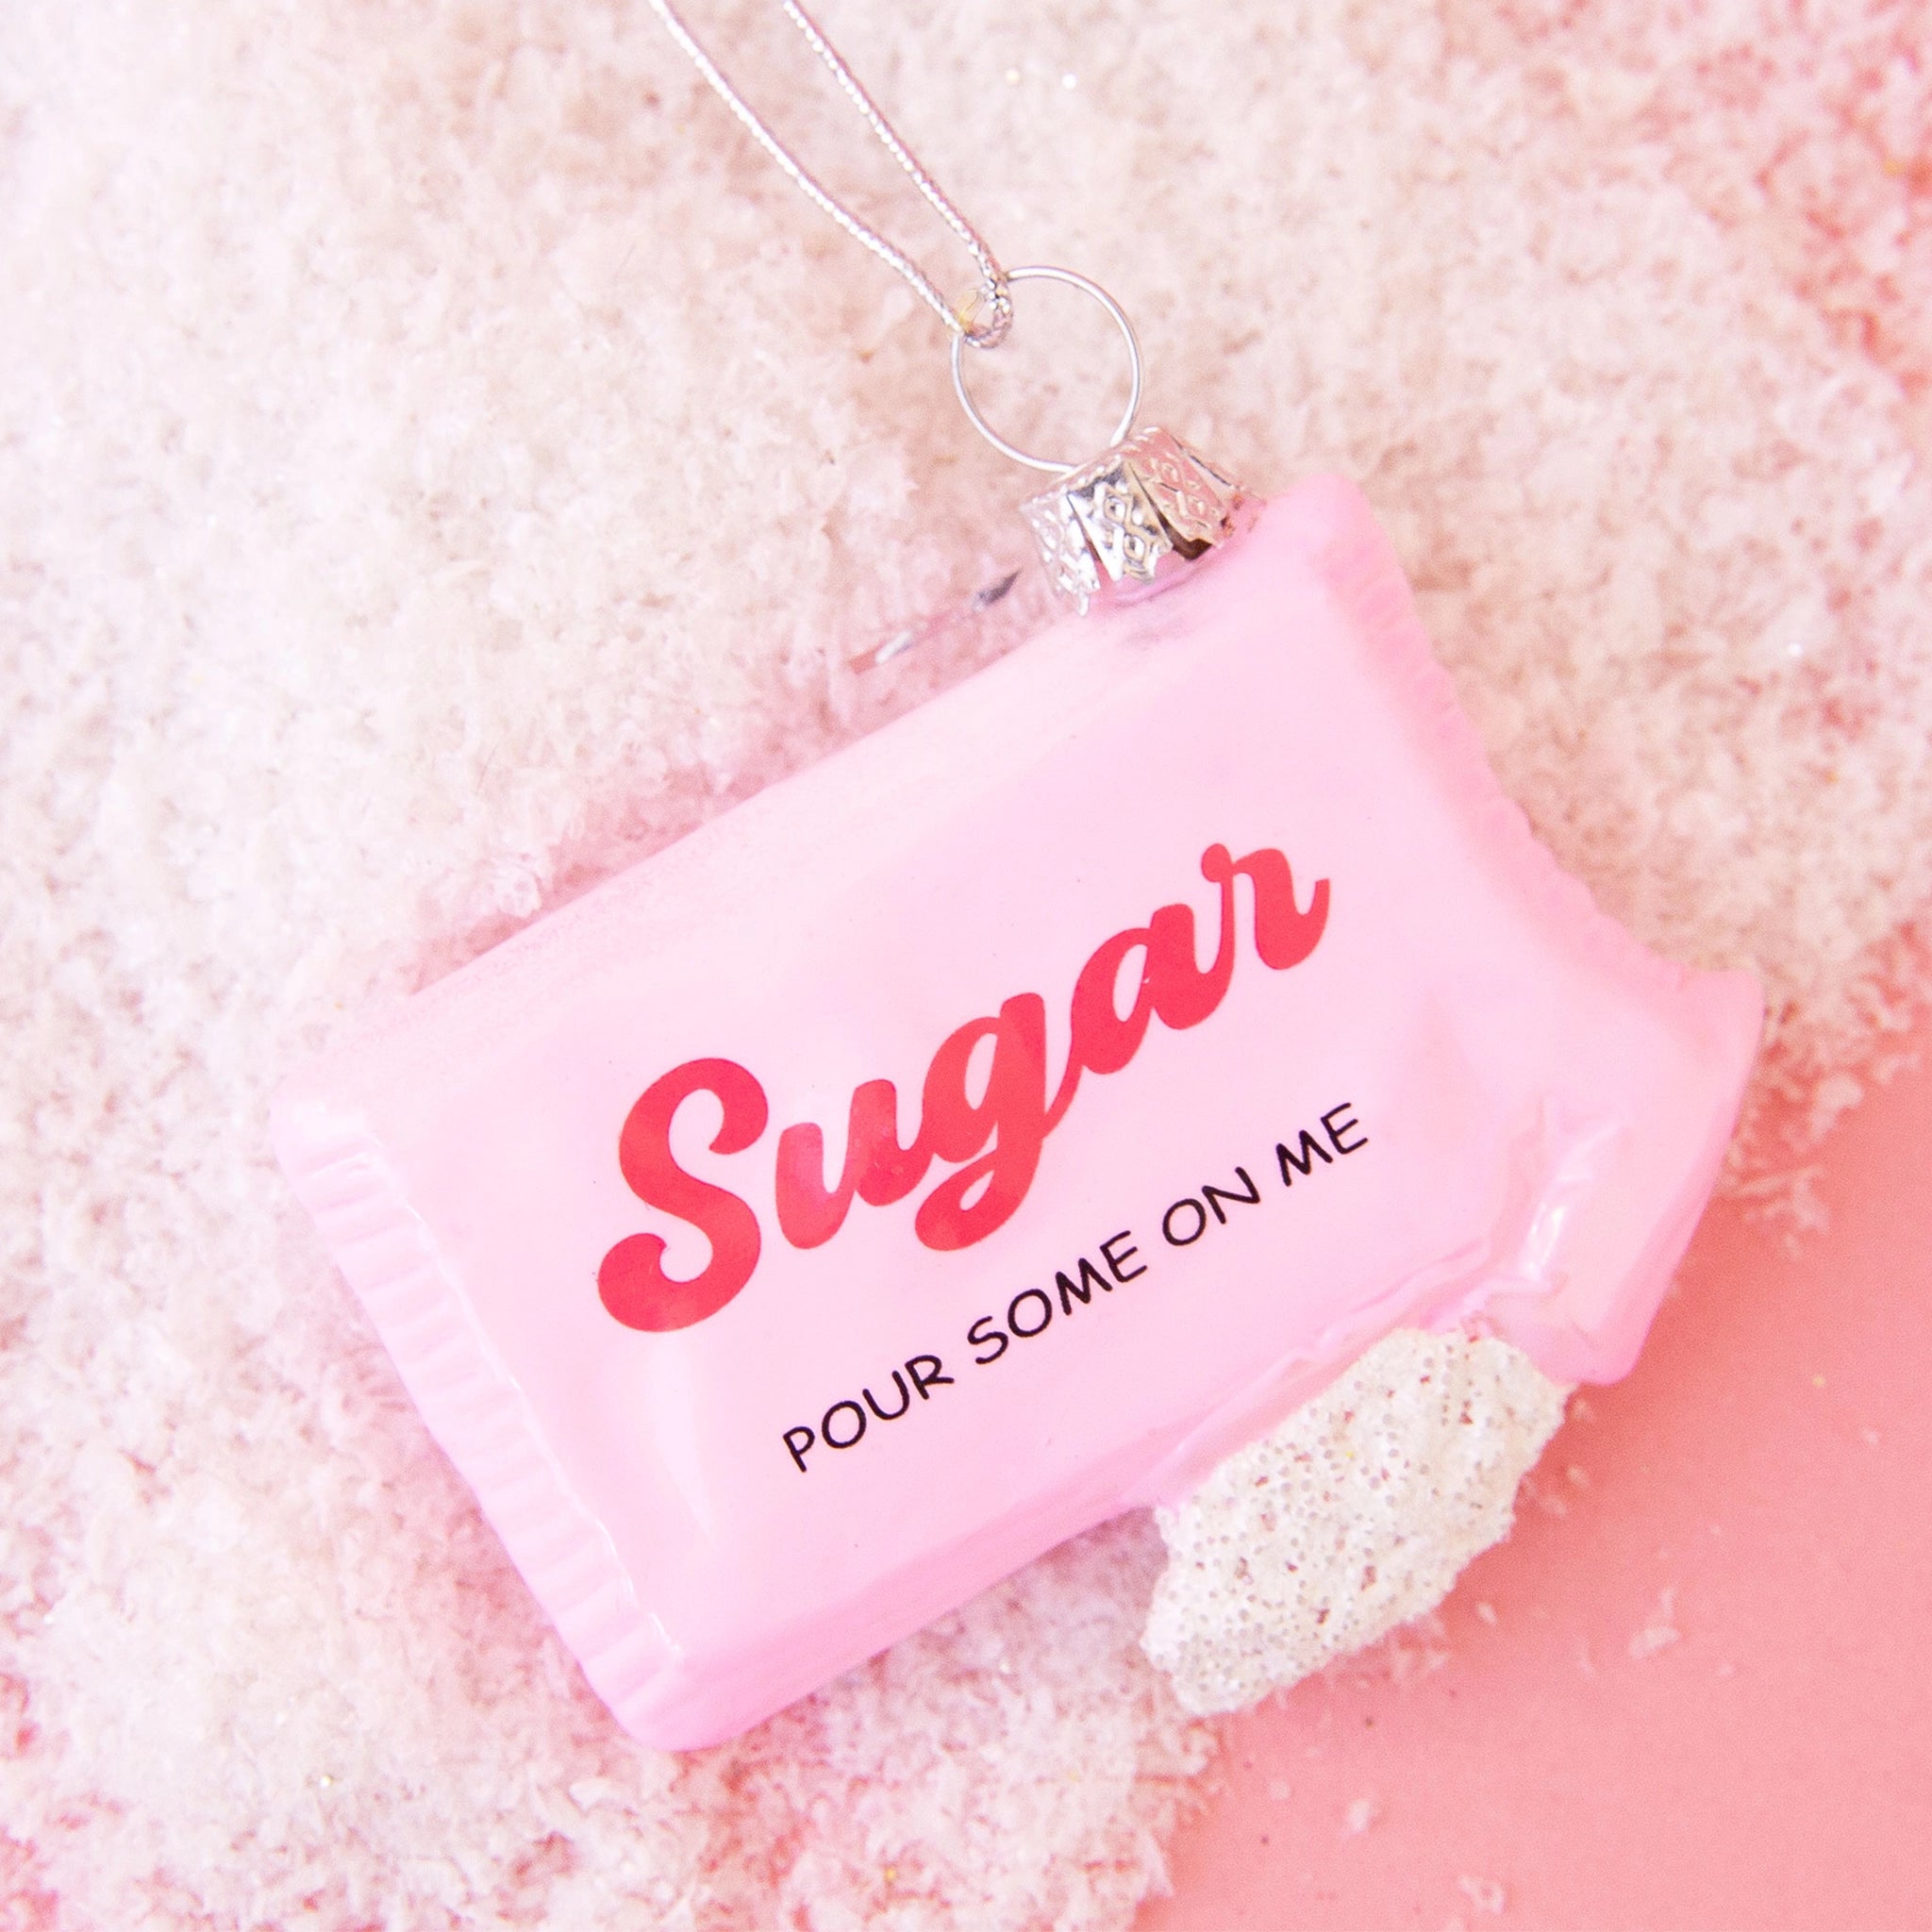 On a pink snowy background is a pink glass ornament in the shape of a sugar packet with hot pink text in the center that reads, &quot;Sugar Pour Some Sugar On Me&quot;. 